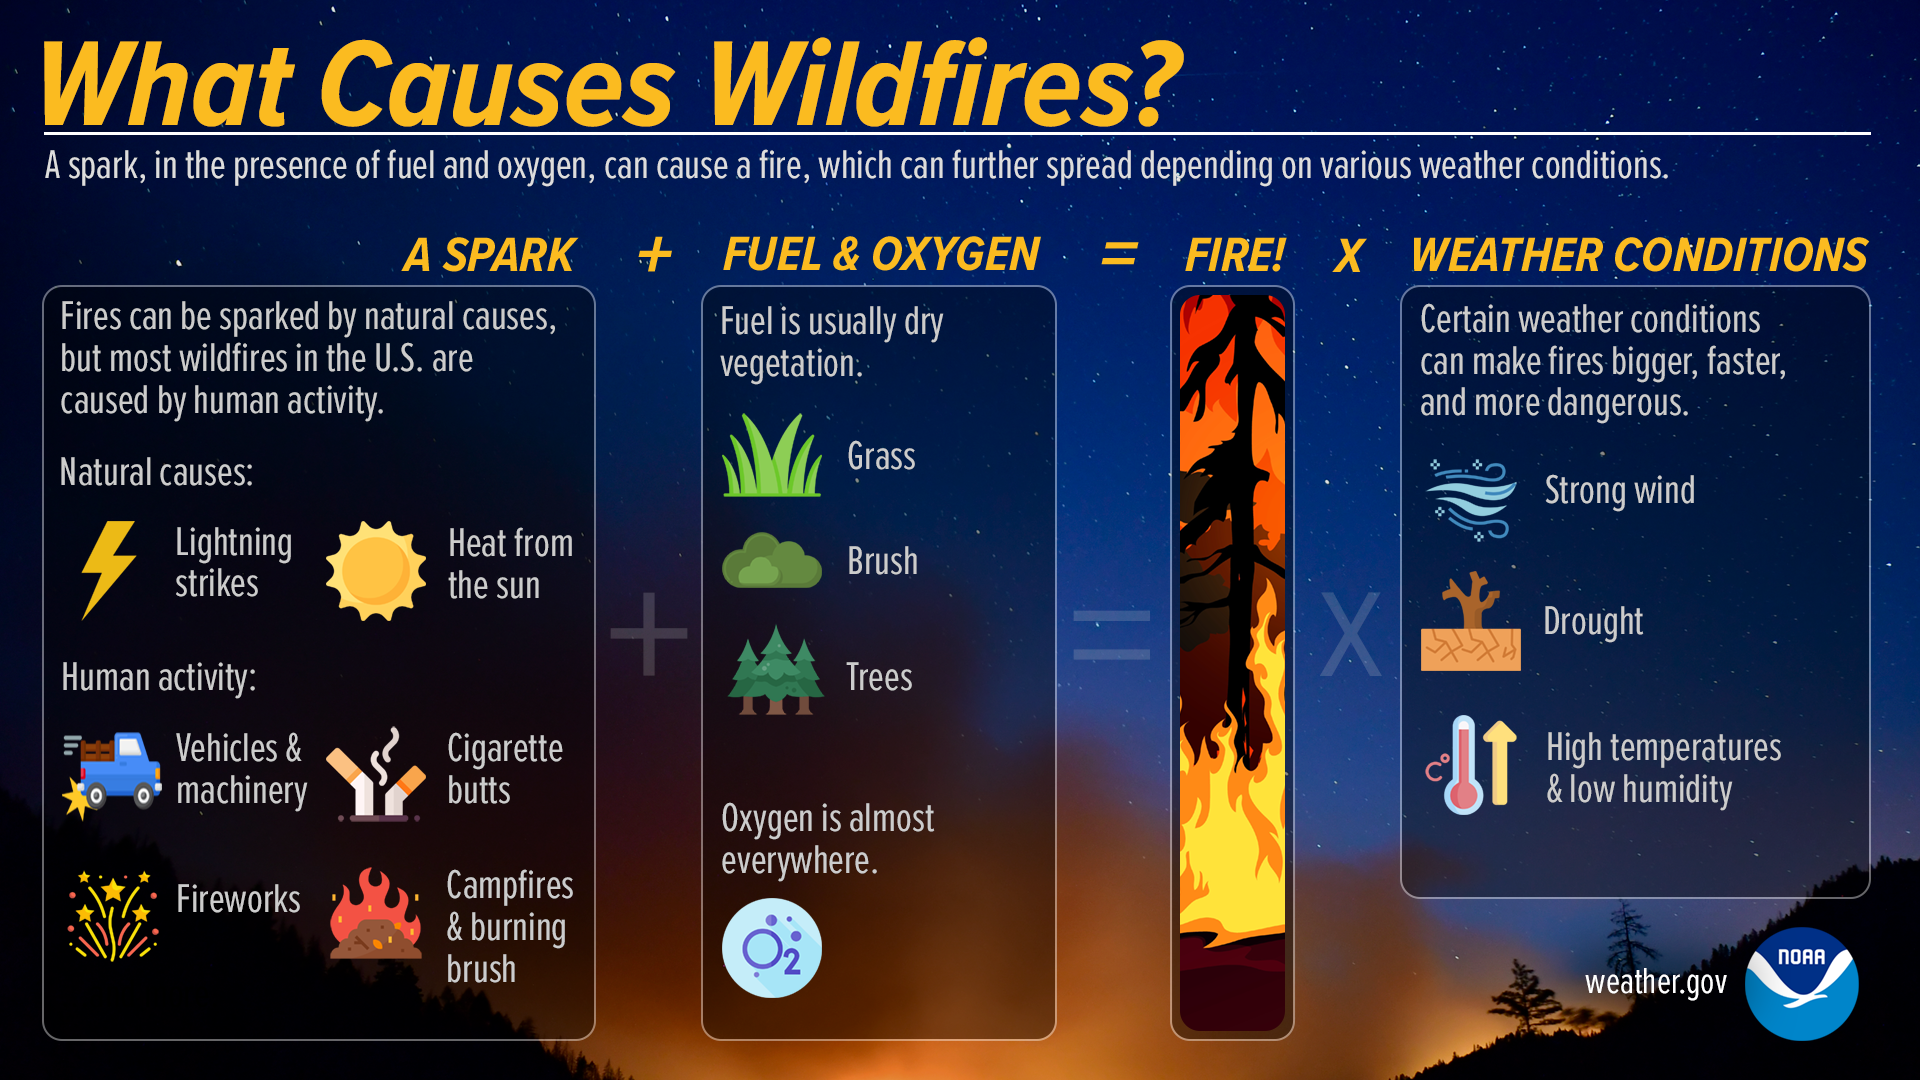 What causes wildfires?